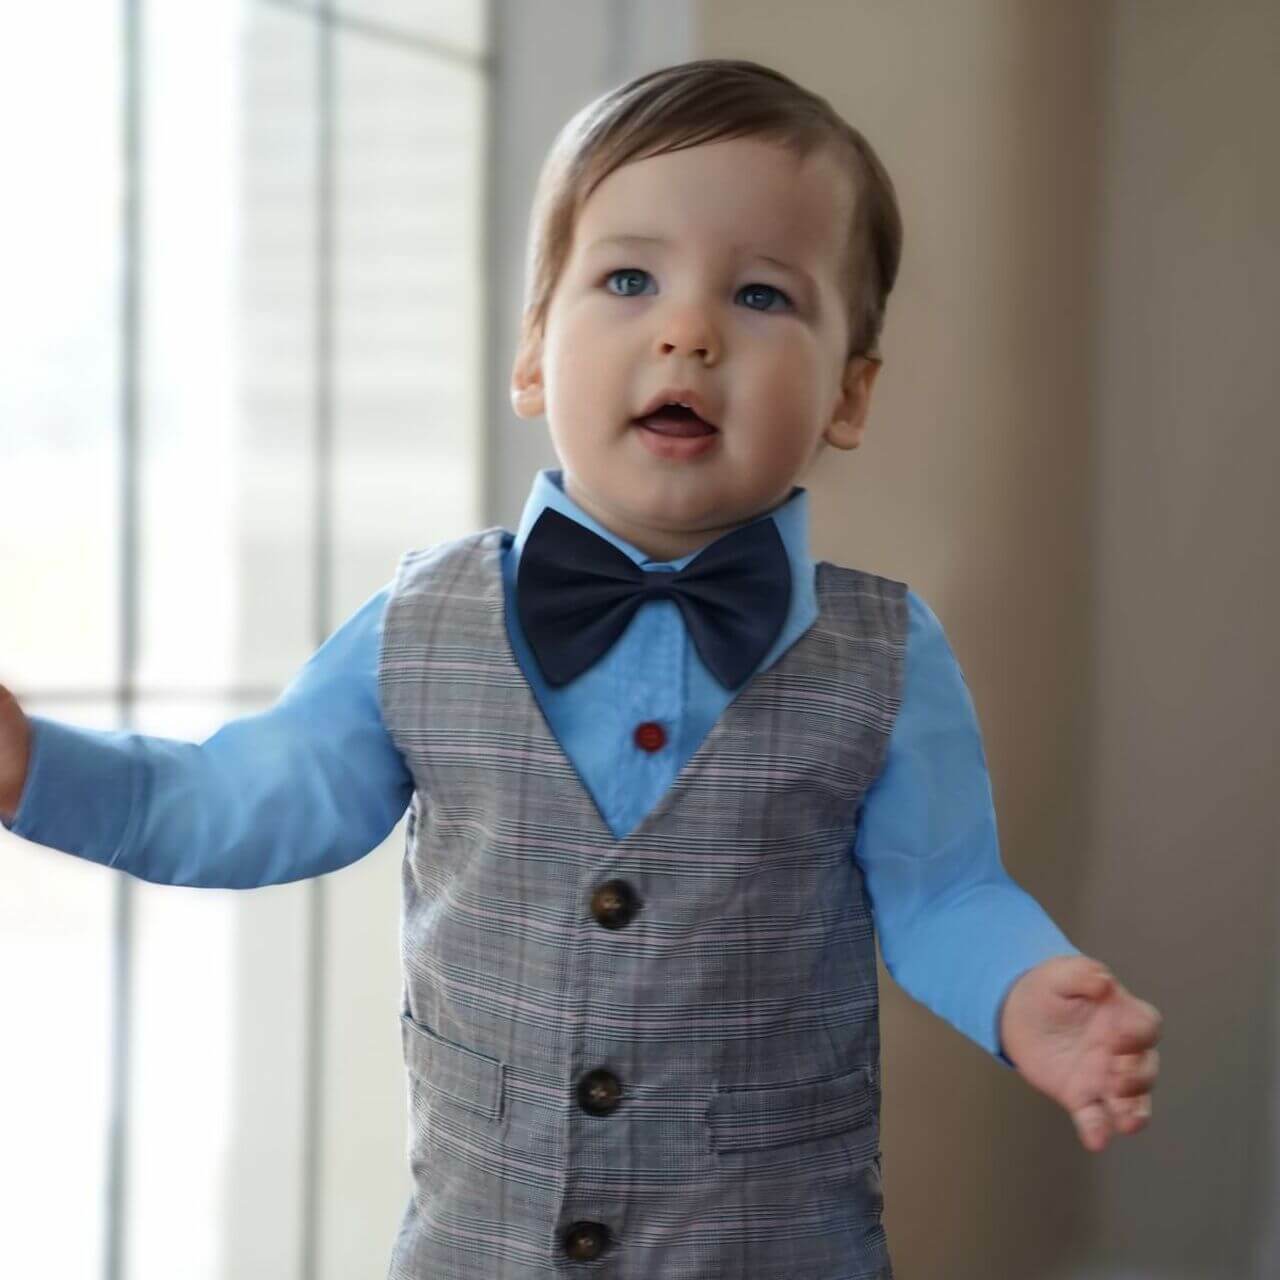 Toddler in blue shirt and plaid vest with bowtie